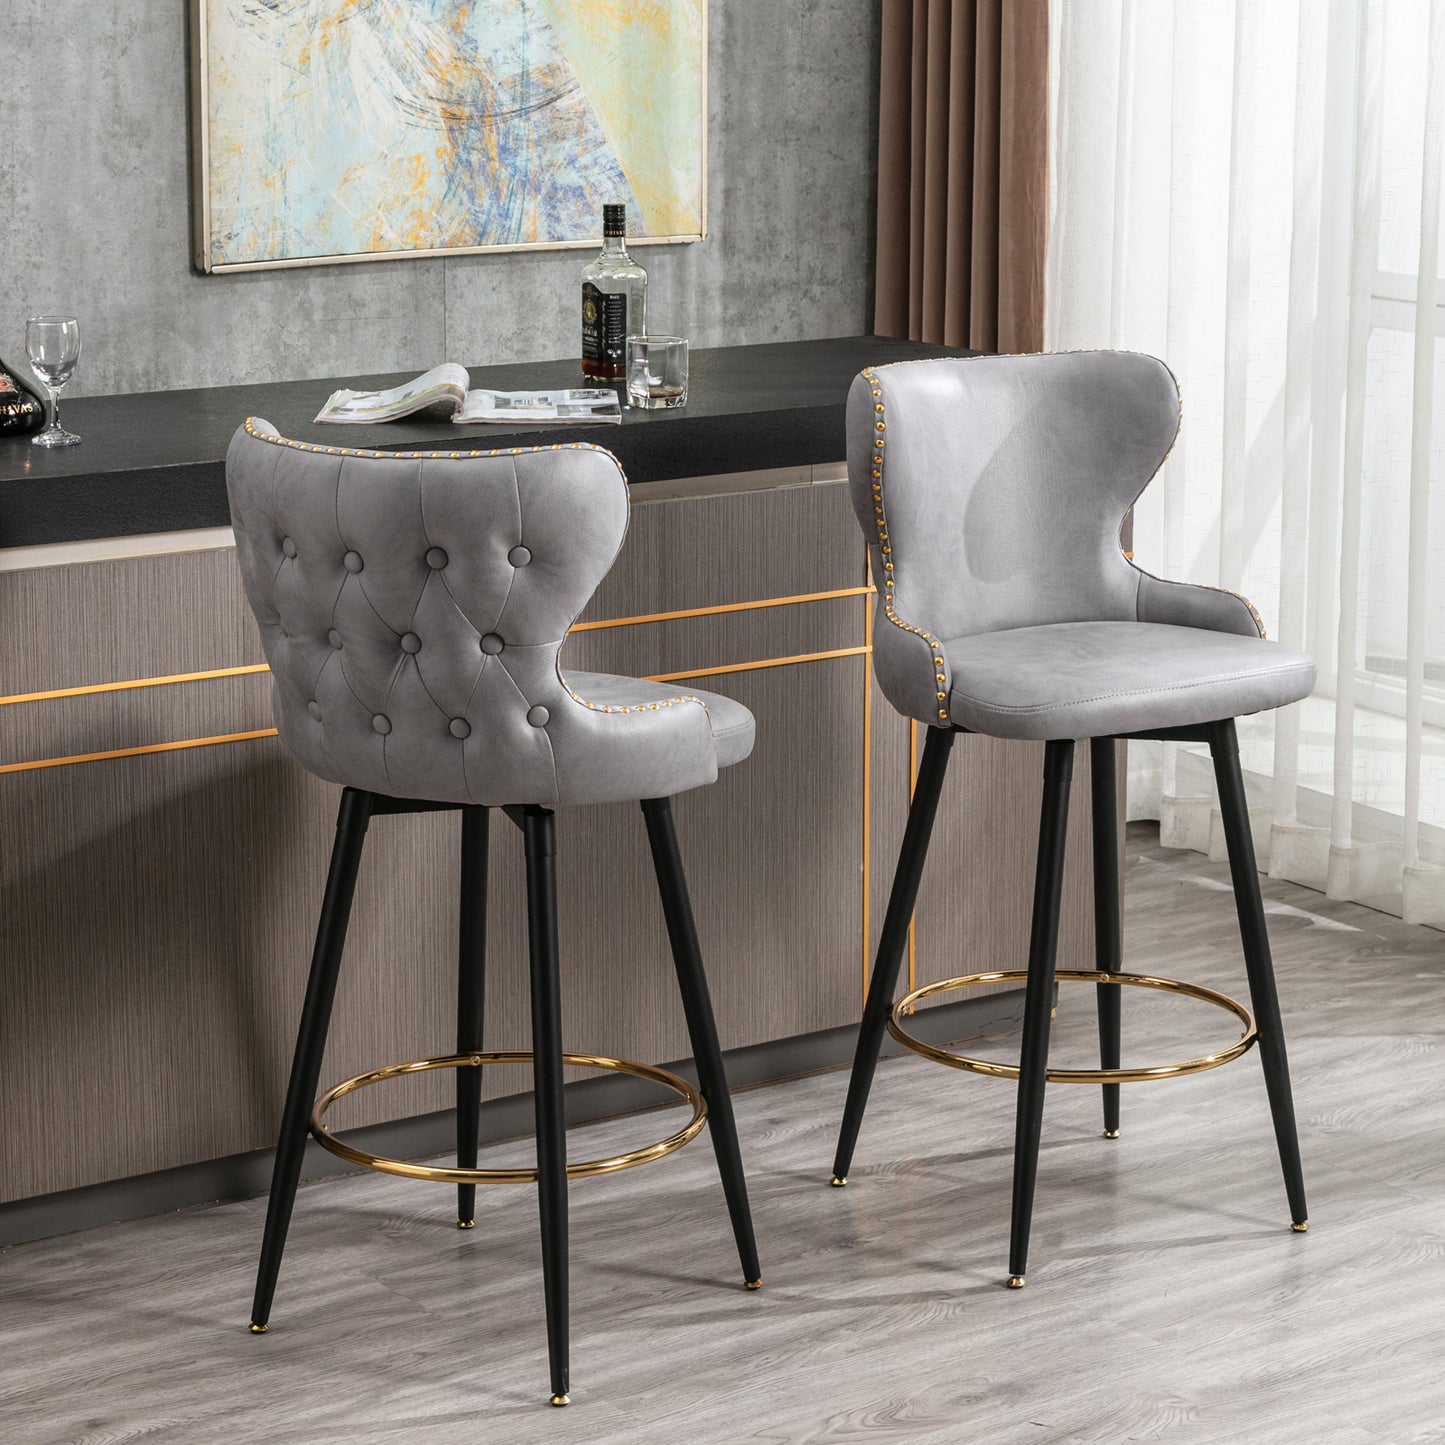 29" Modern Leathaire Fabric bar chairs, 180 degree Swivel Bar Stool Chair for Kitchen, Tufted Gold Nailhead Trim Gold Decoration Bar Stools with Metal Legs, Set of 2 (Light Grey)